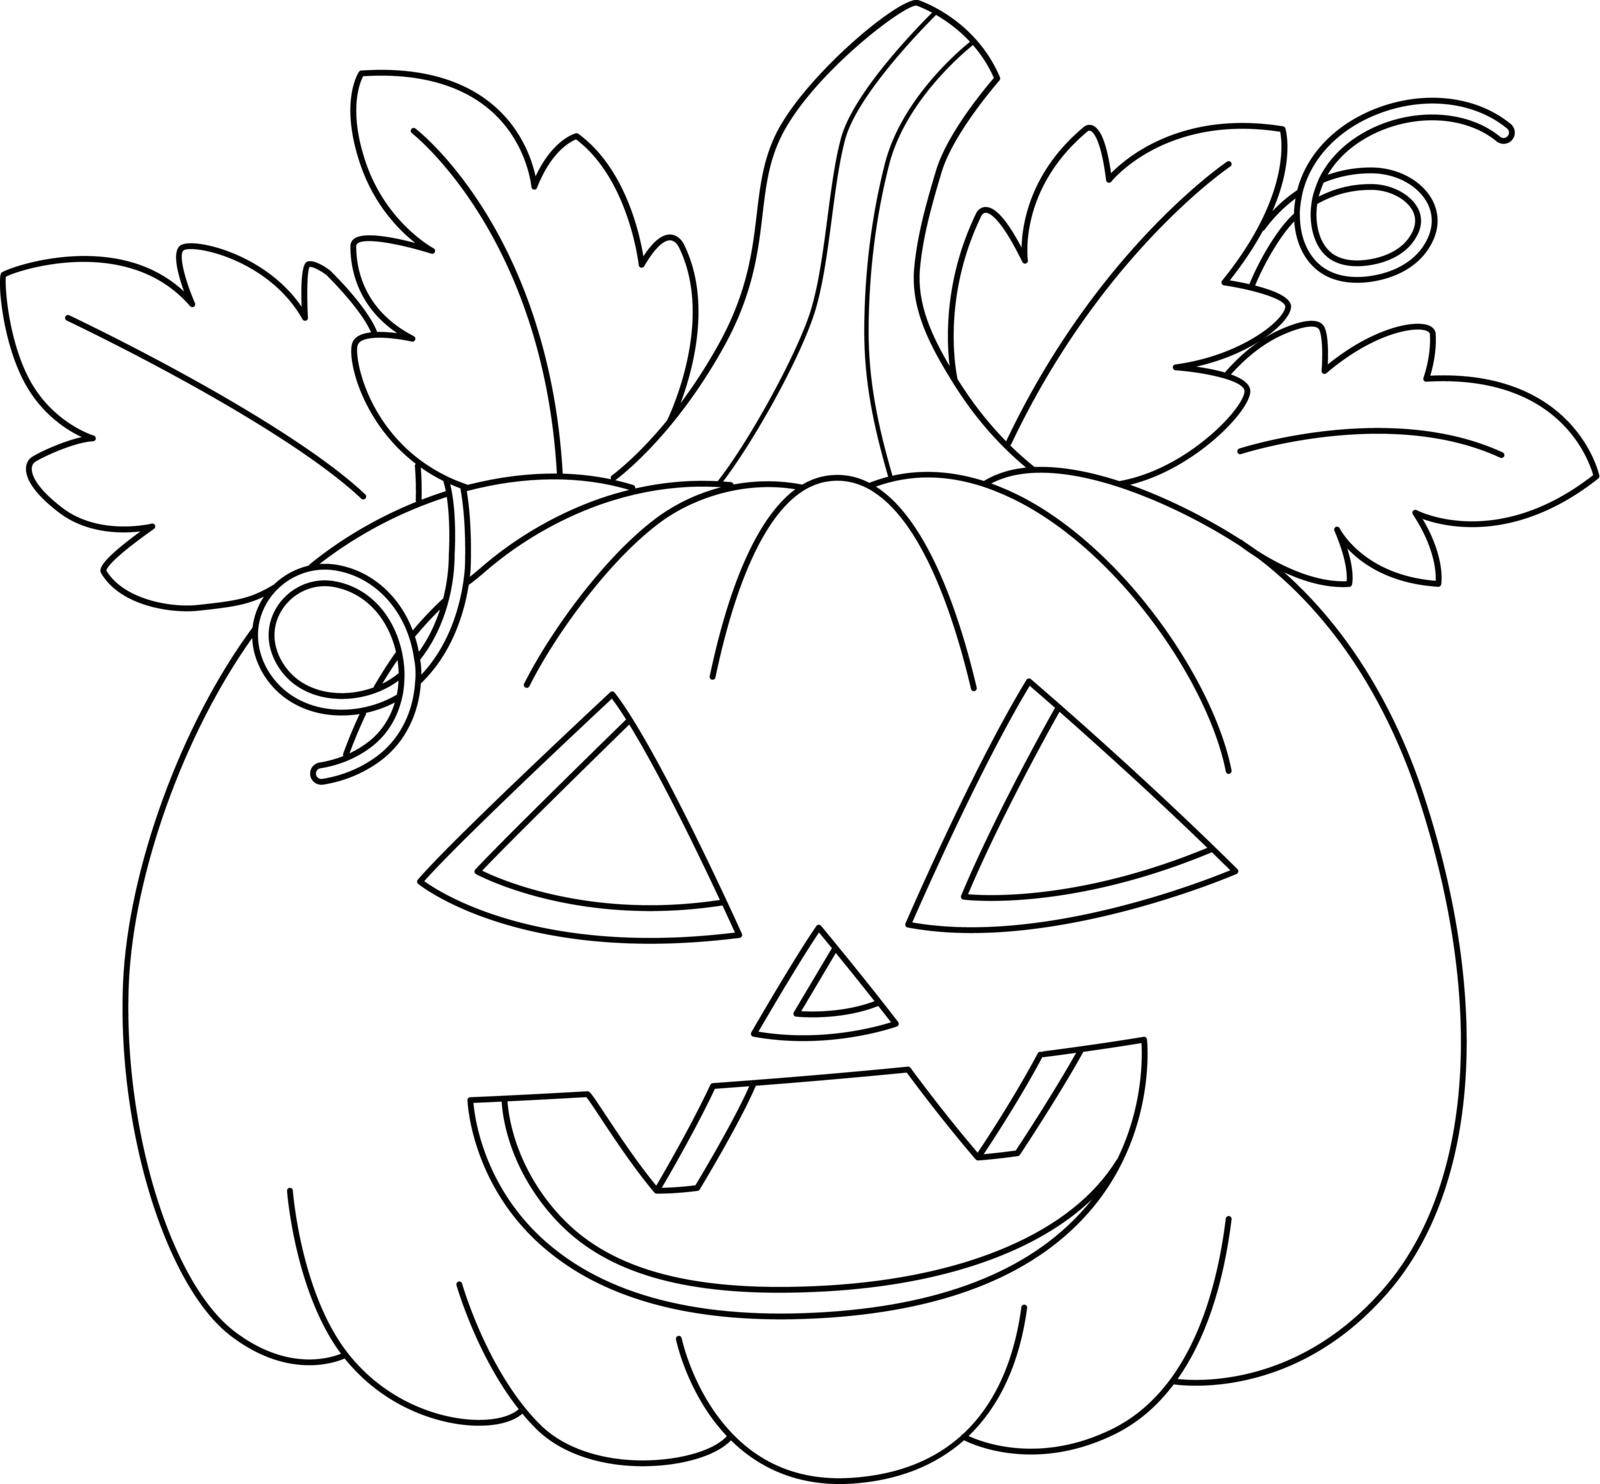 A cute and funny coloring page of a pumpkin on Halloween. Provides hours of coloring fun for children. To color, this page is very easy. Suitable for little kids and toddlers.